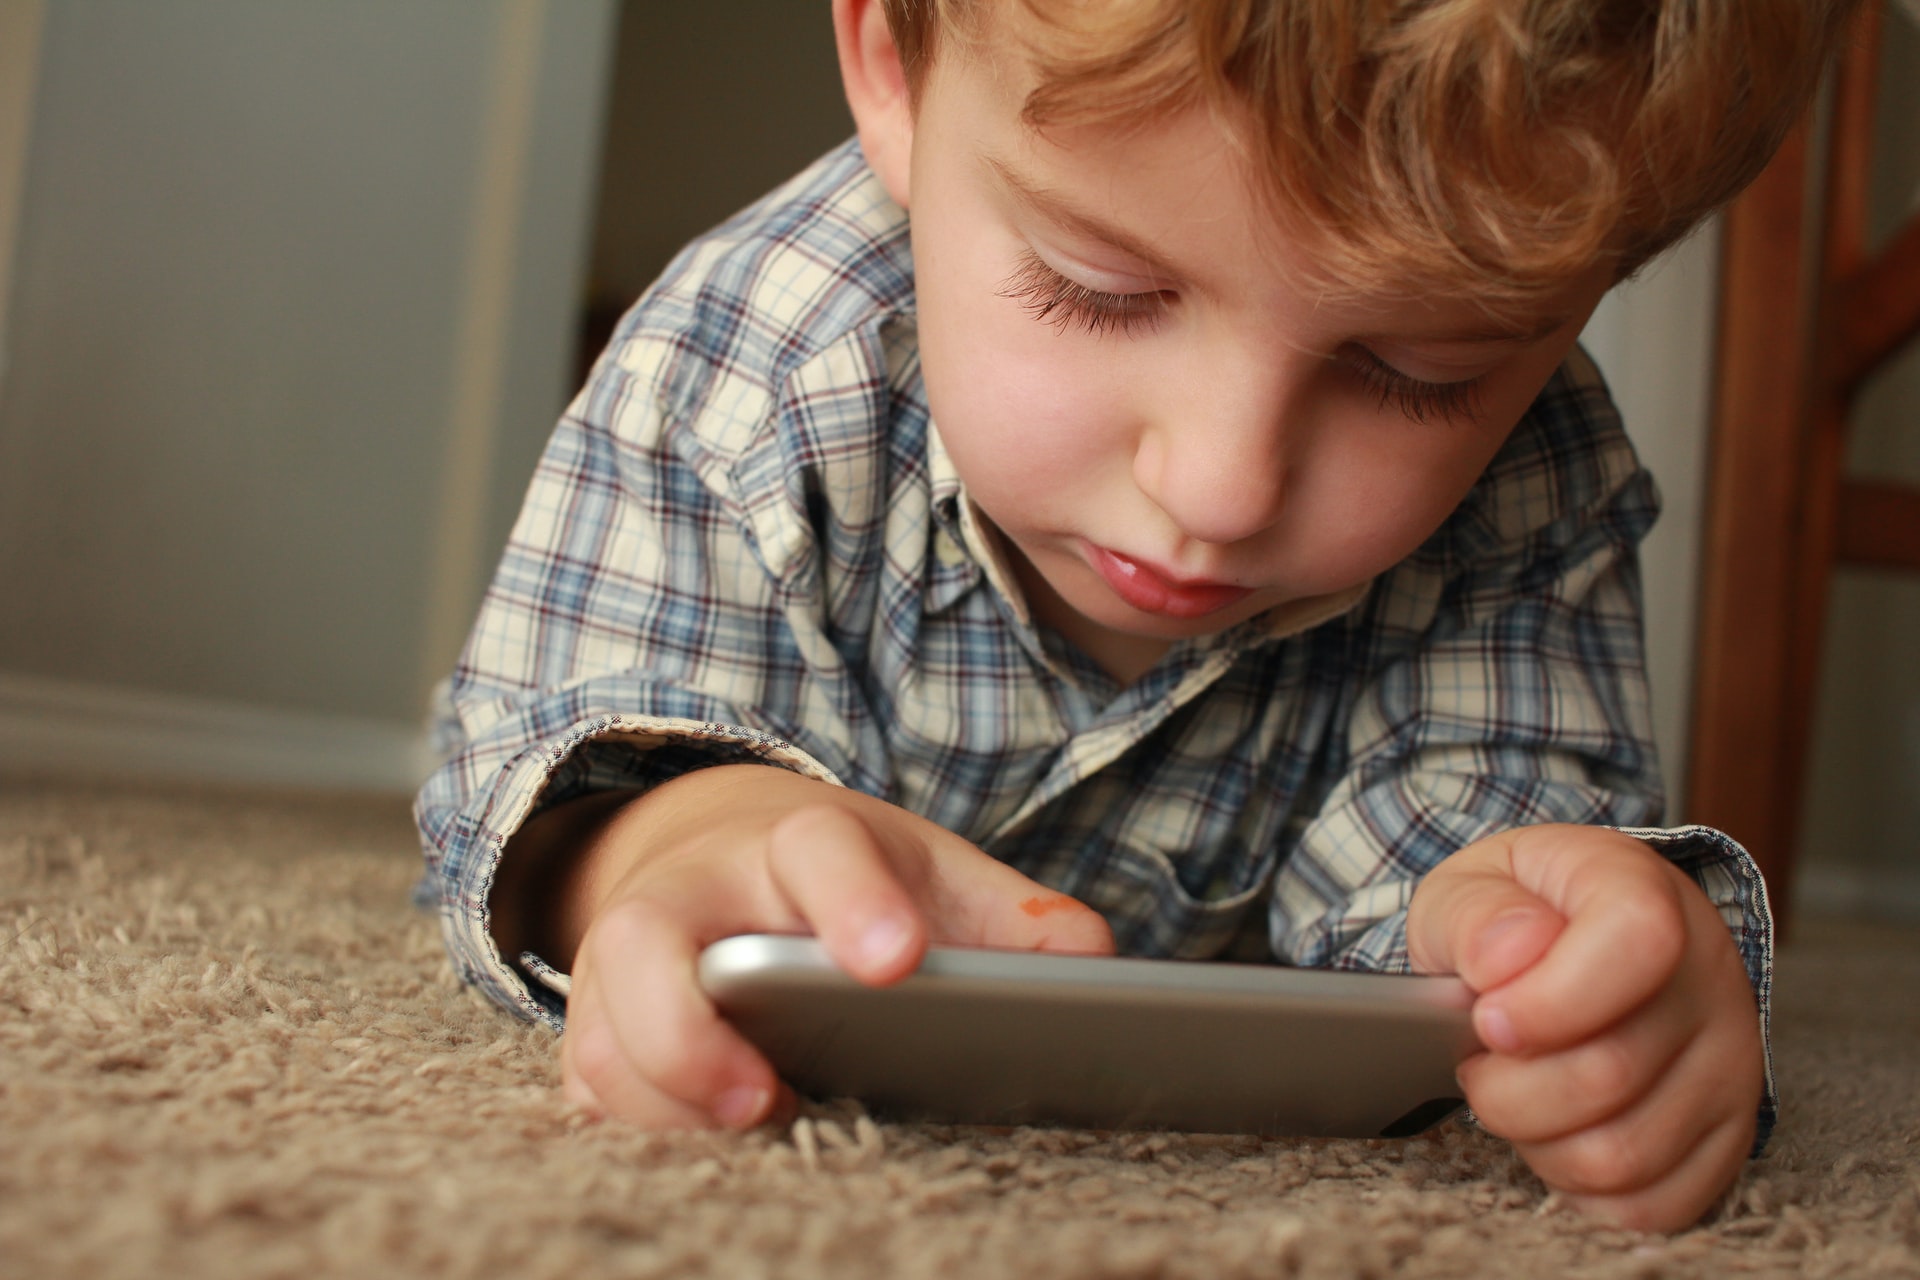 Games That You Can Play With Your Little Over the Phone or Online